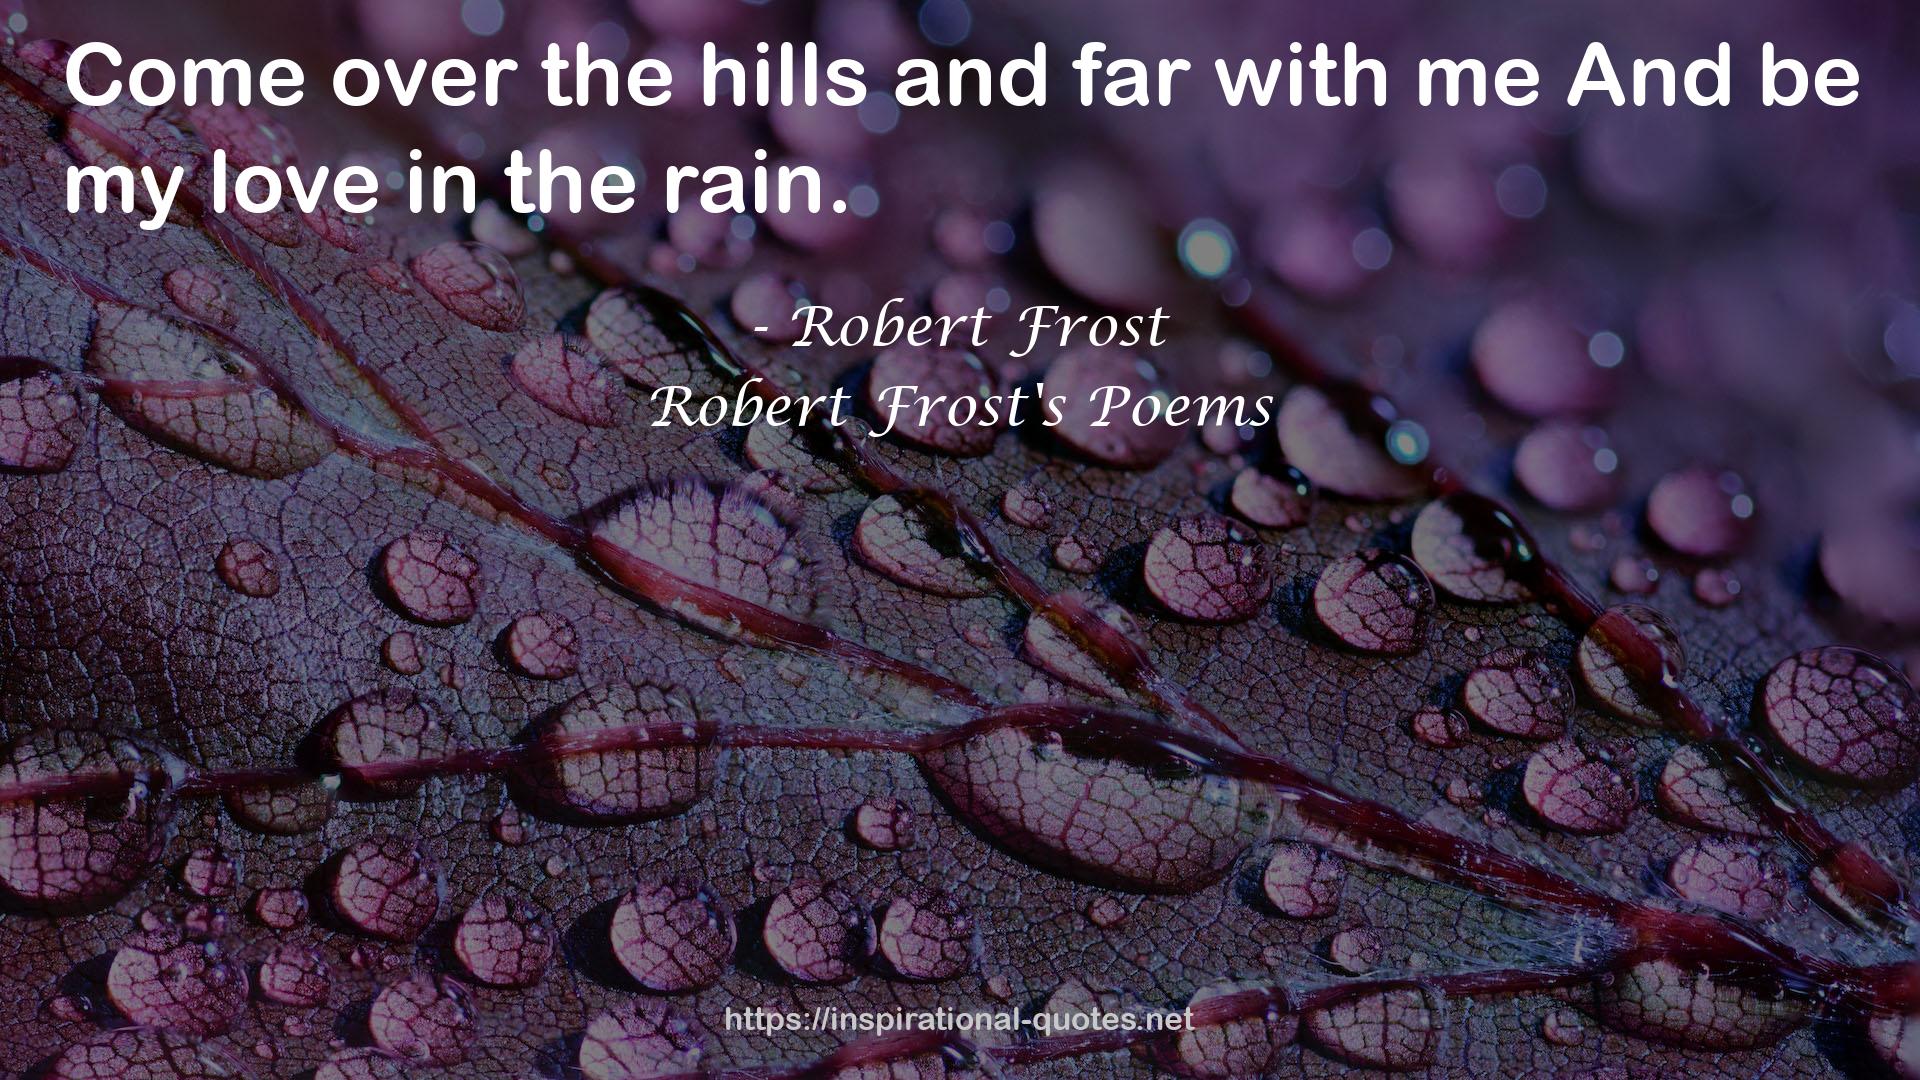 Robert Frost's Poems QUOTES